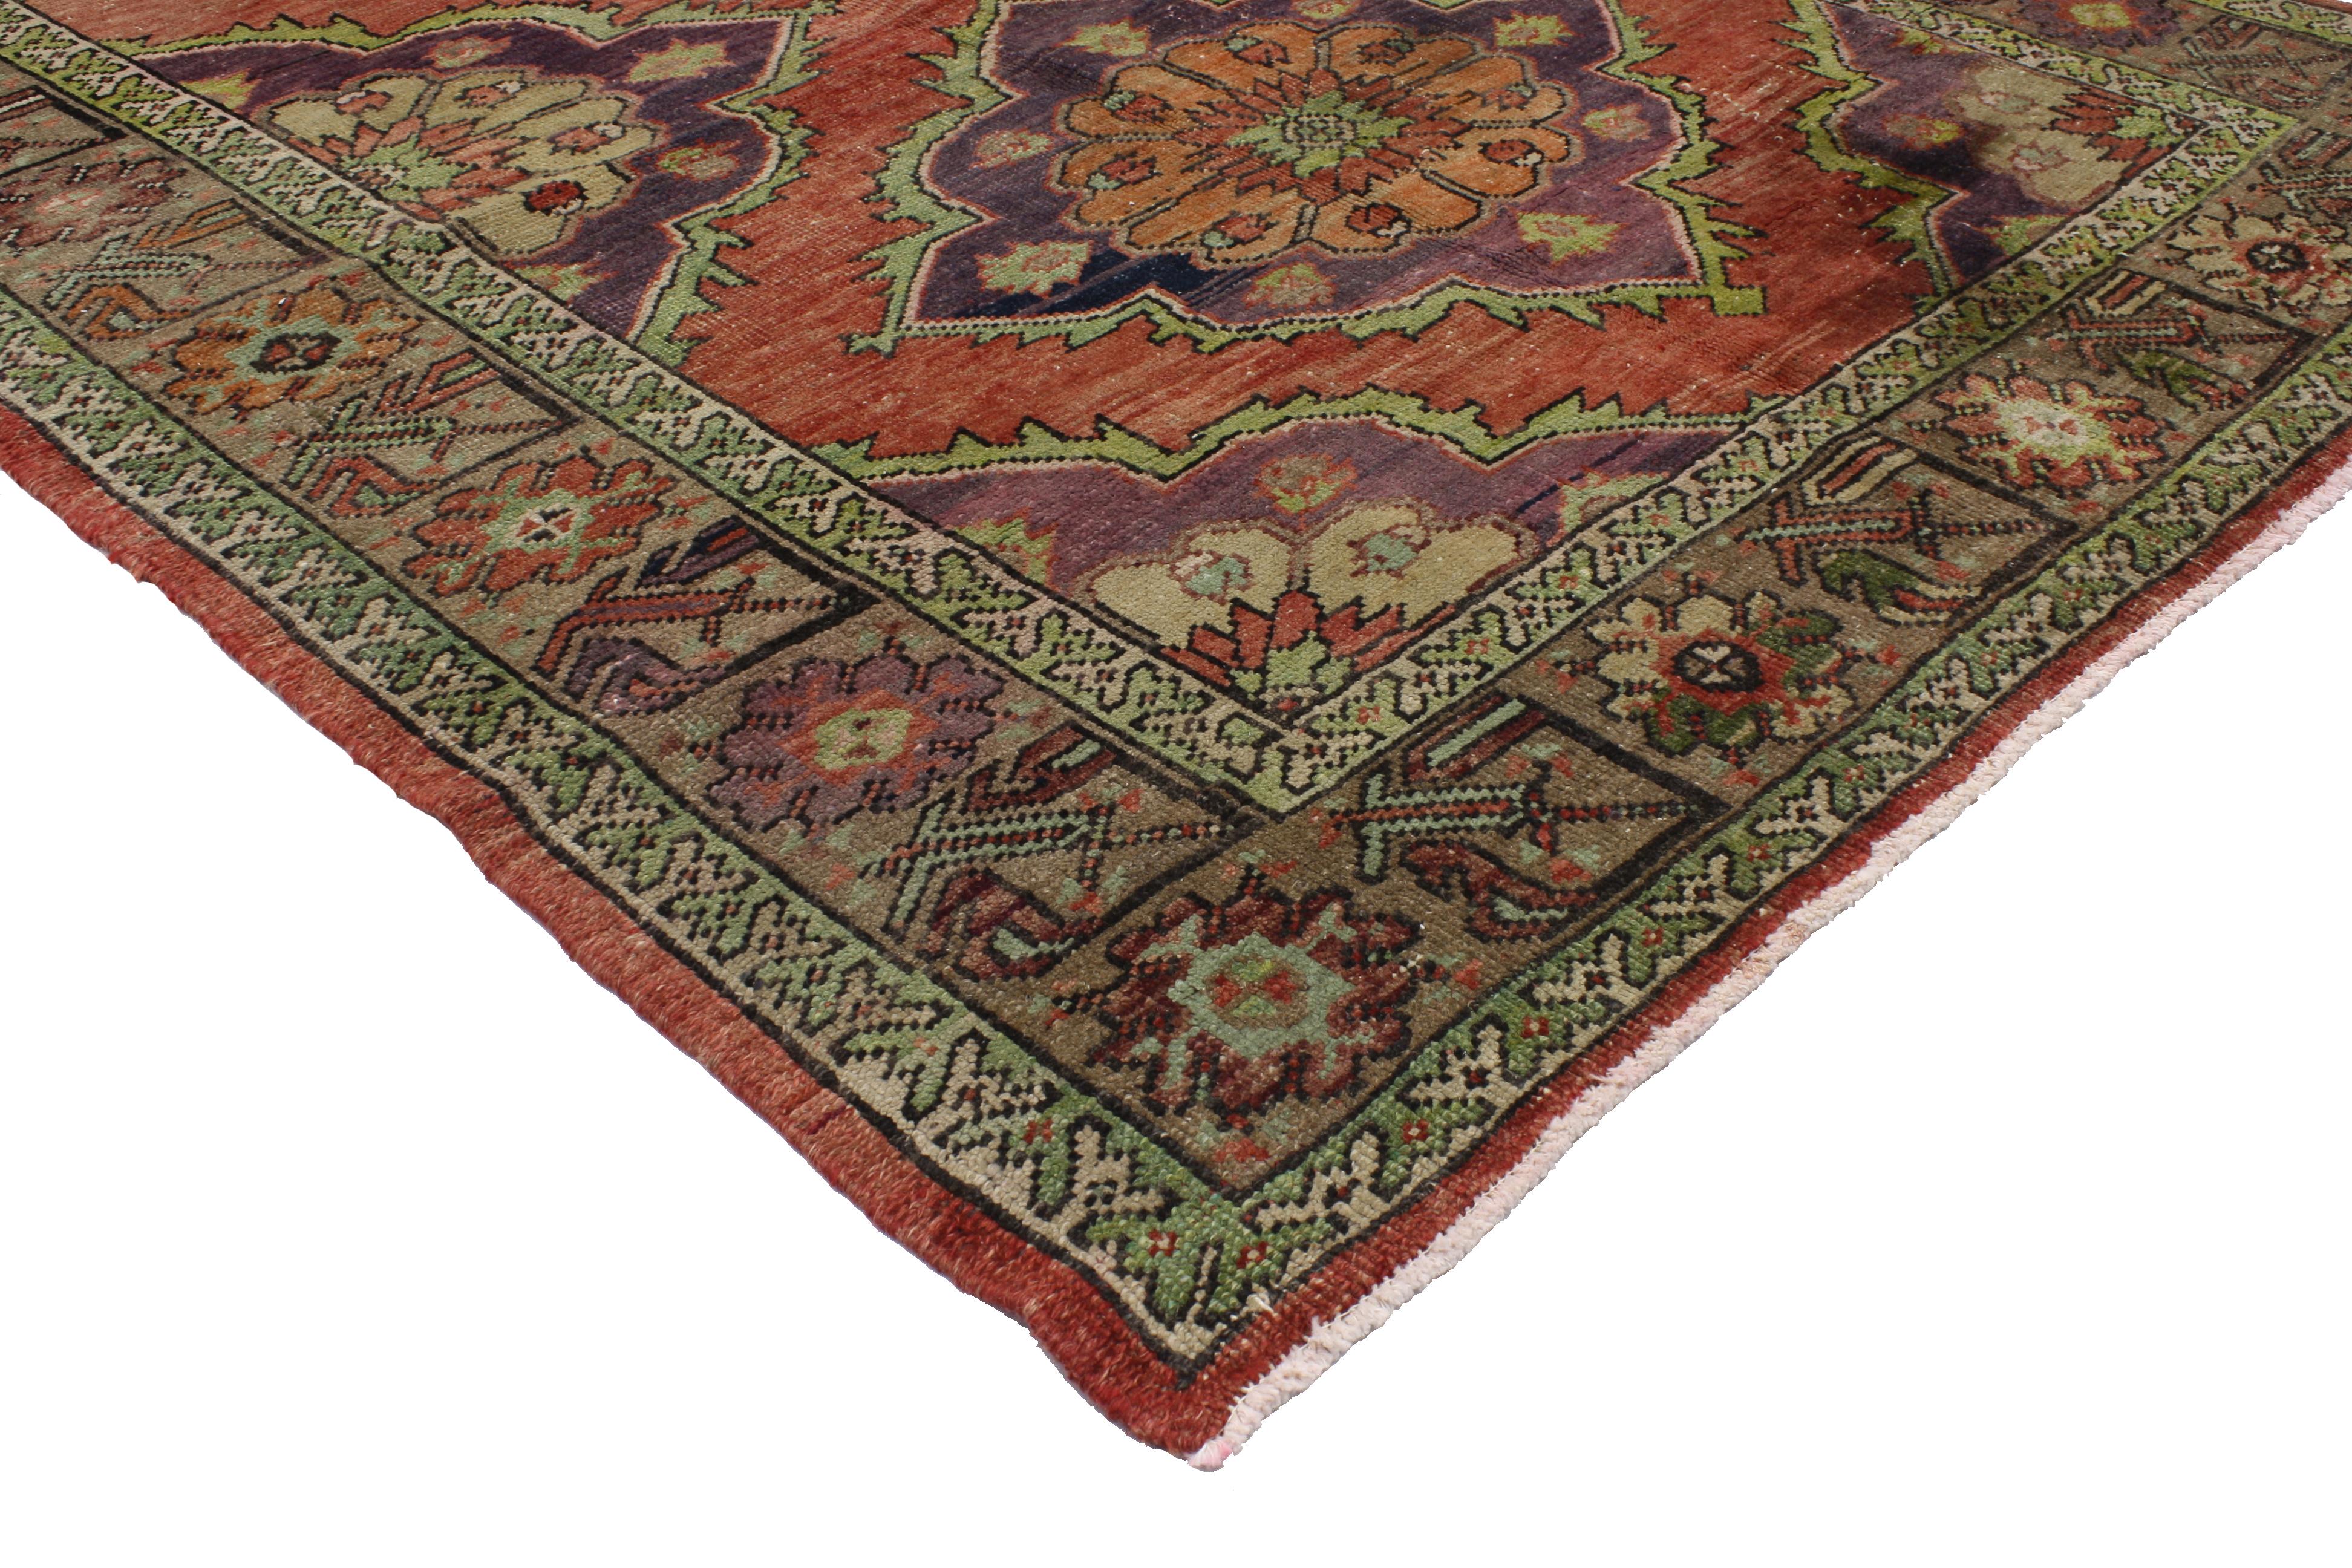 51792, vintage Turkish Oushak runner, wide hallway runner. This hand knotted wool vintage Turkish Oushak runner features four cusped medallions floating in an abrashed field. Complementary medallion-style ziggurats and corner spandrels reach towards